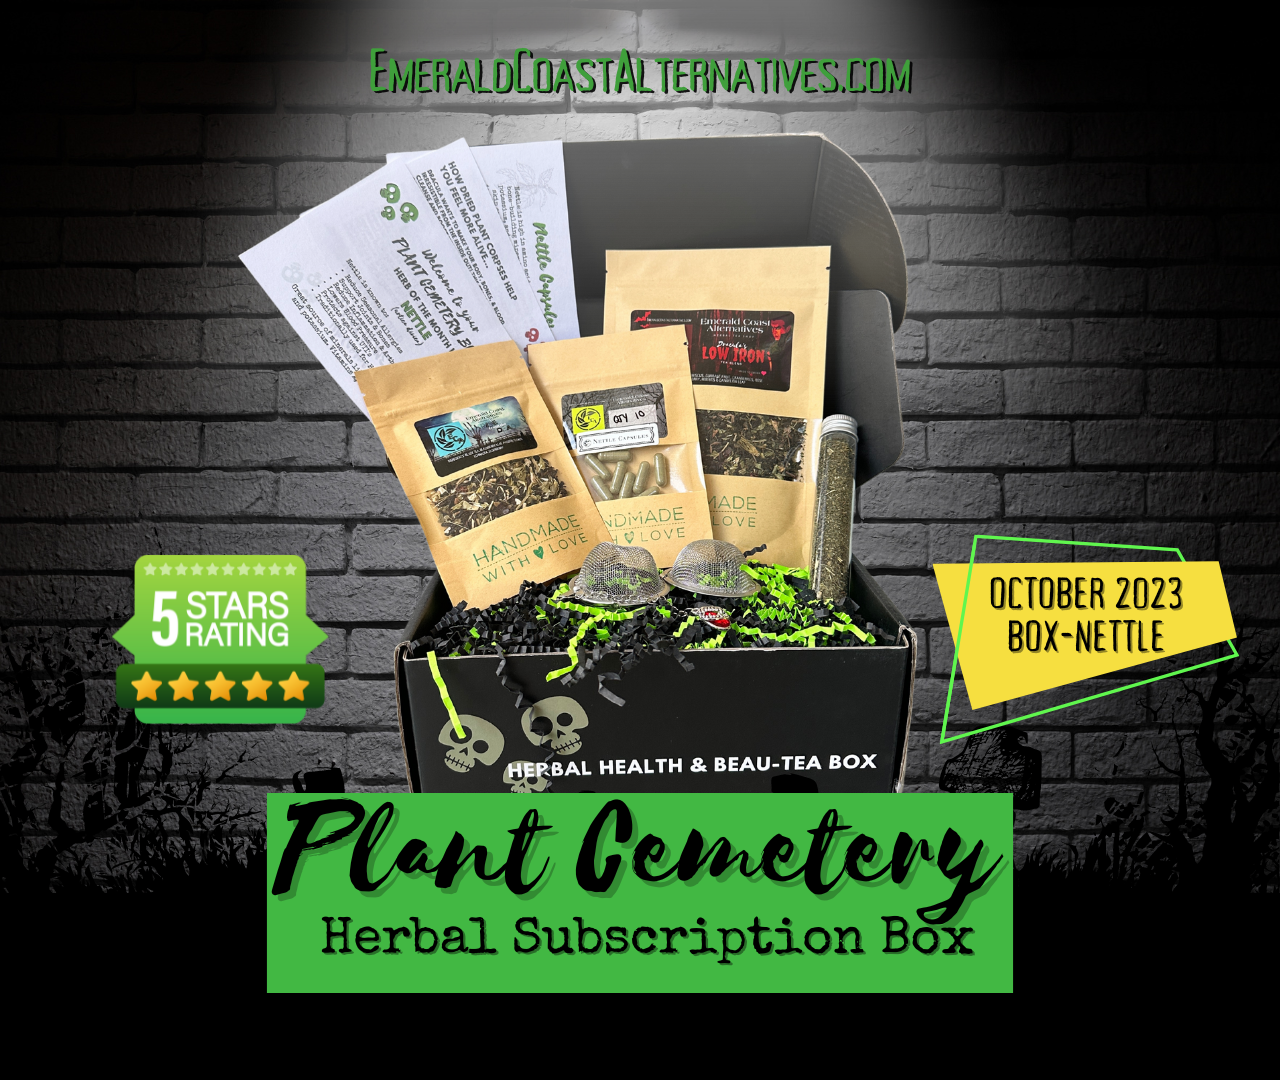 Plant Cemetery Monthly Box (3 Months)